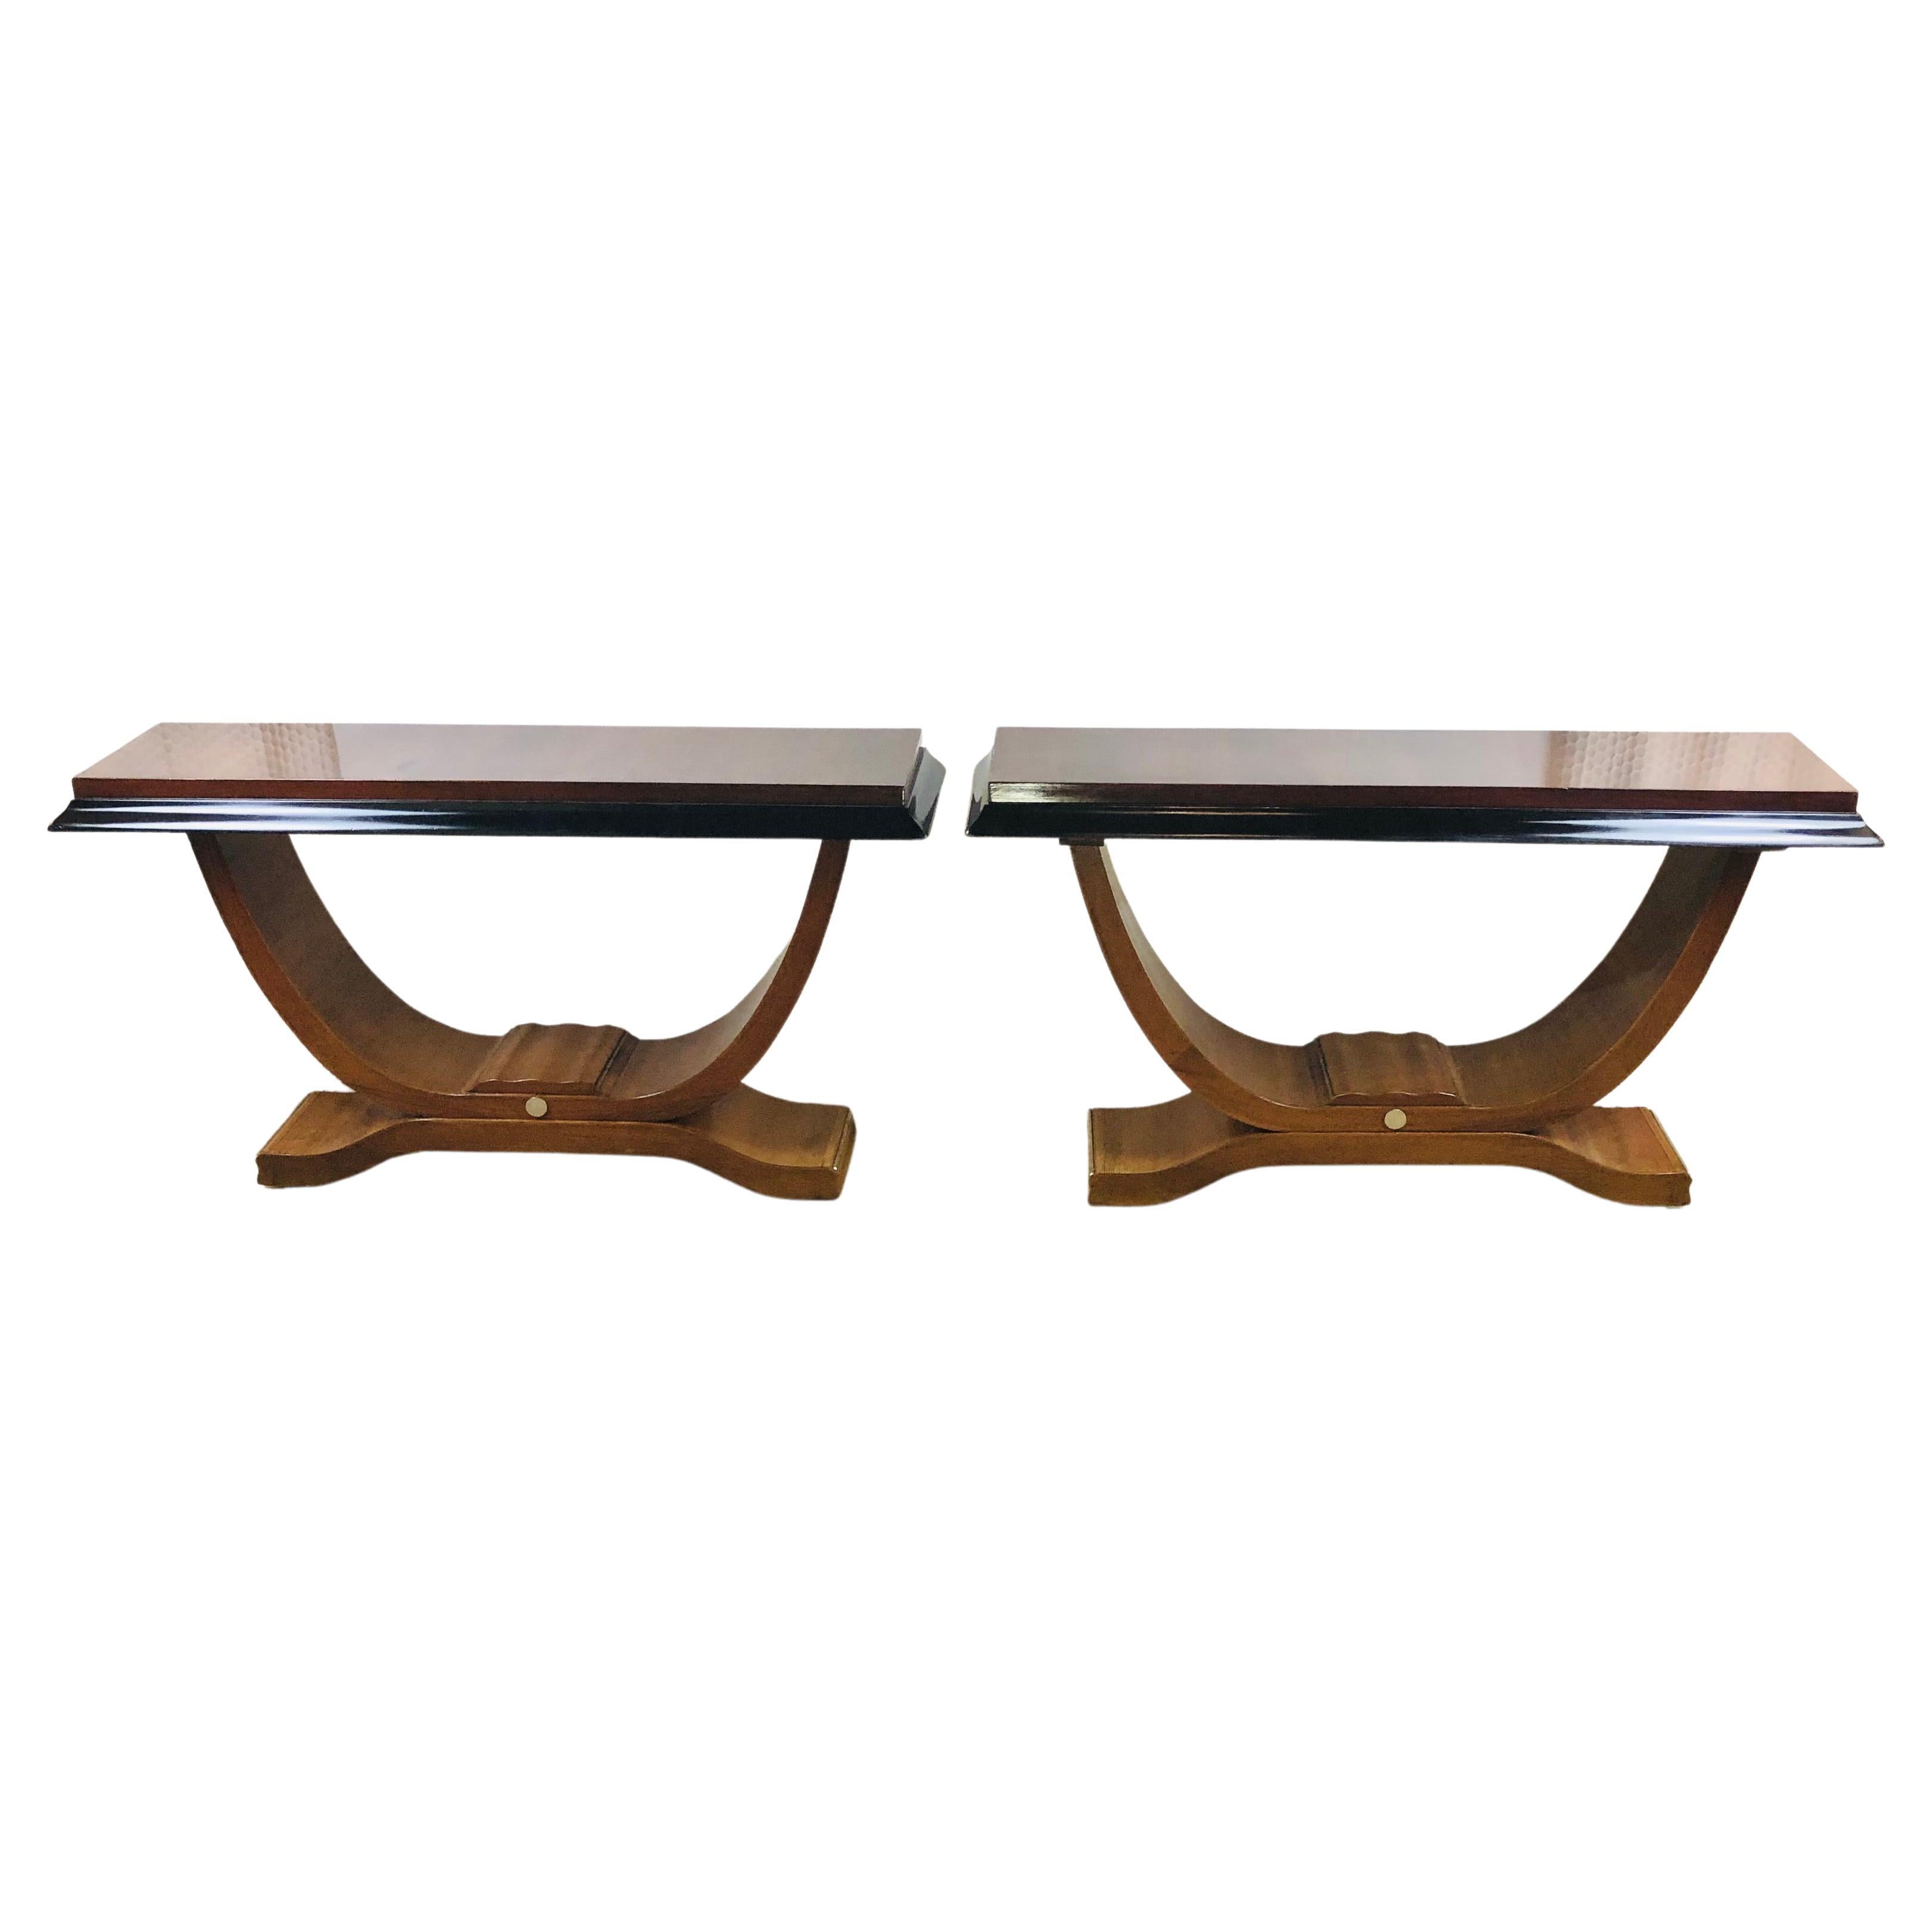 Two French Art Deco Console Tables Nickeled Trim attrib. Alfred Porteneuve For Sale